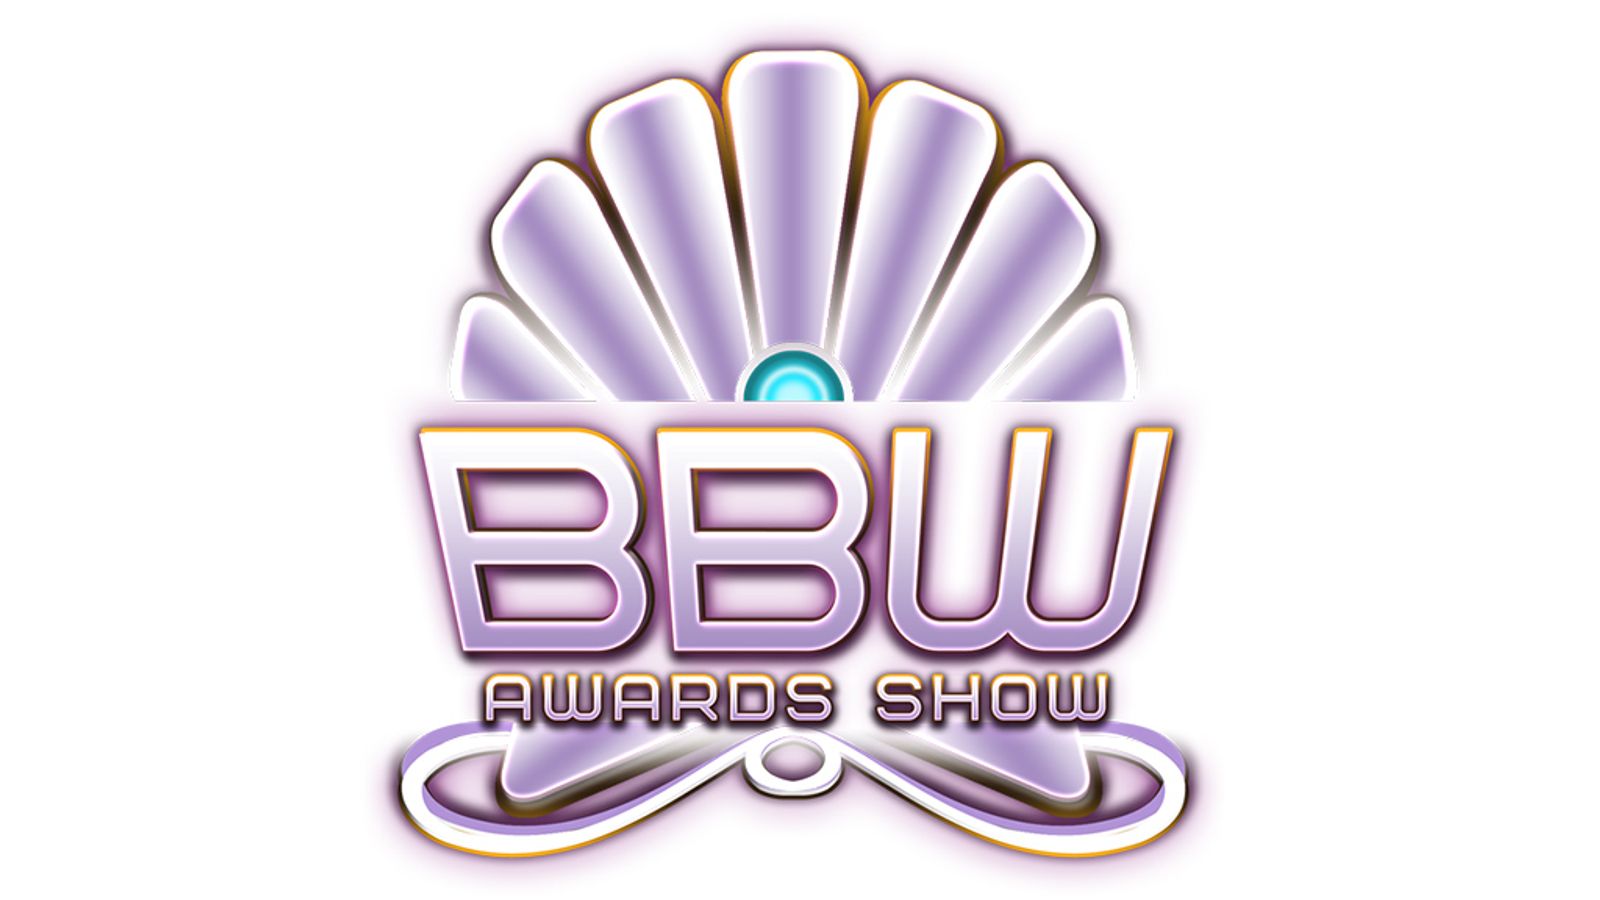 Next Week's BBW Awards Show Almost Completely Sold